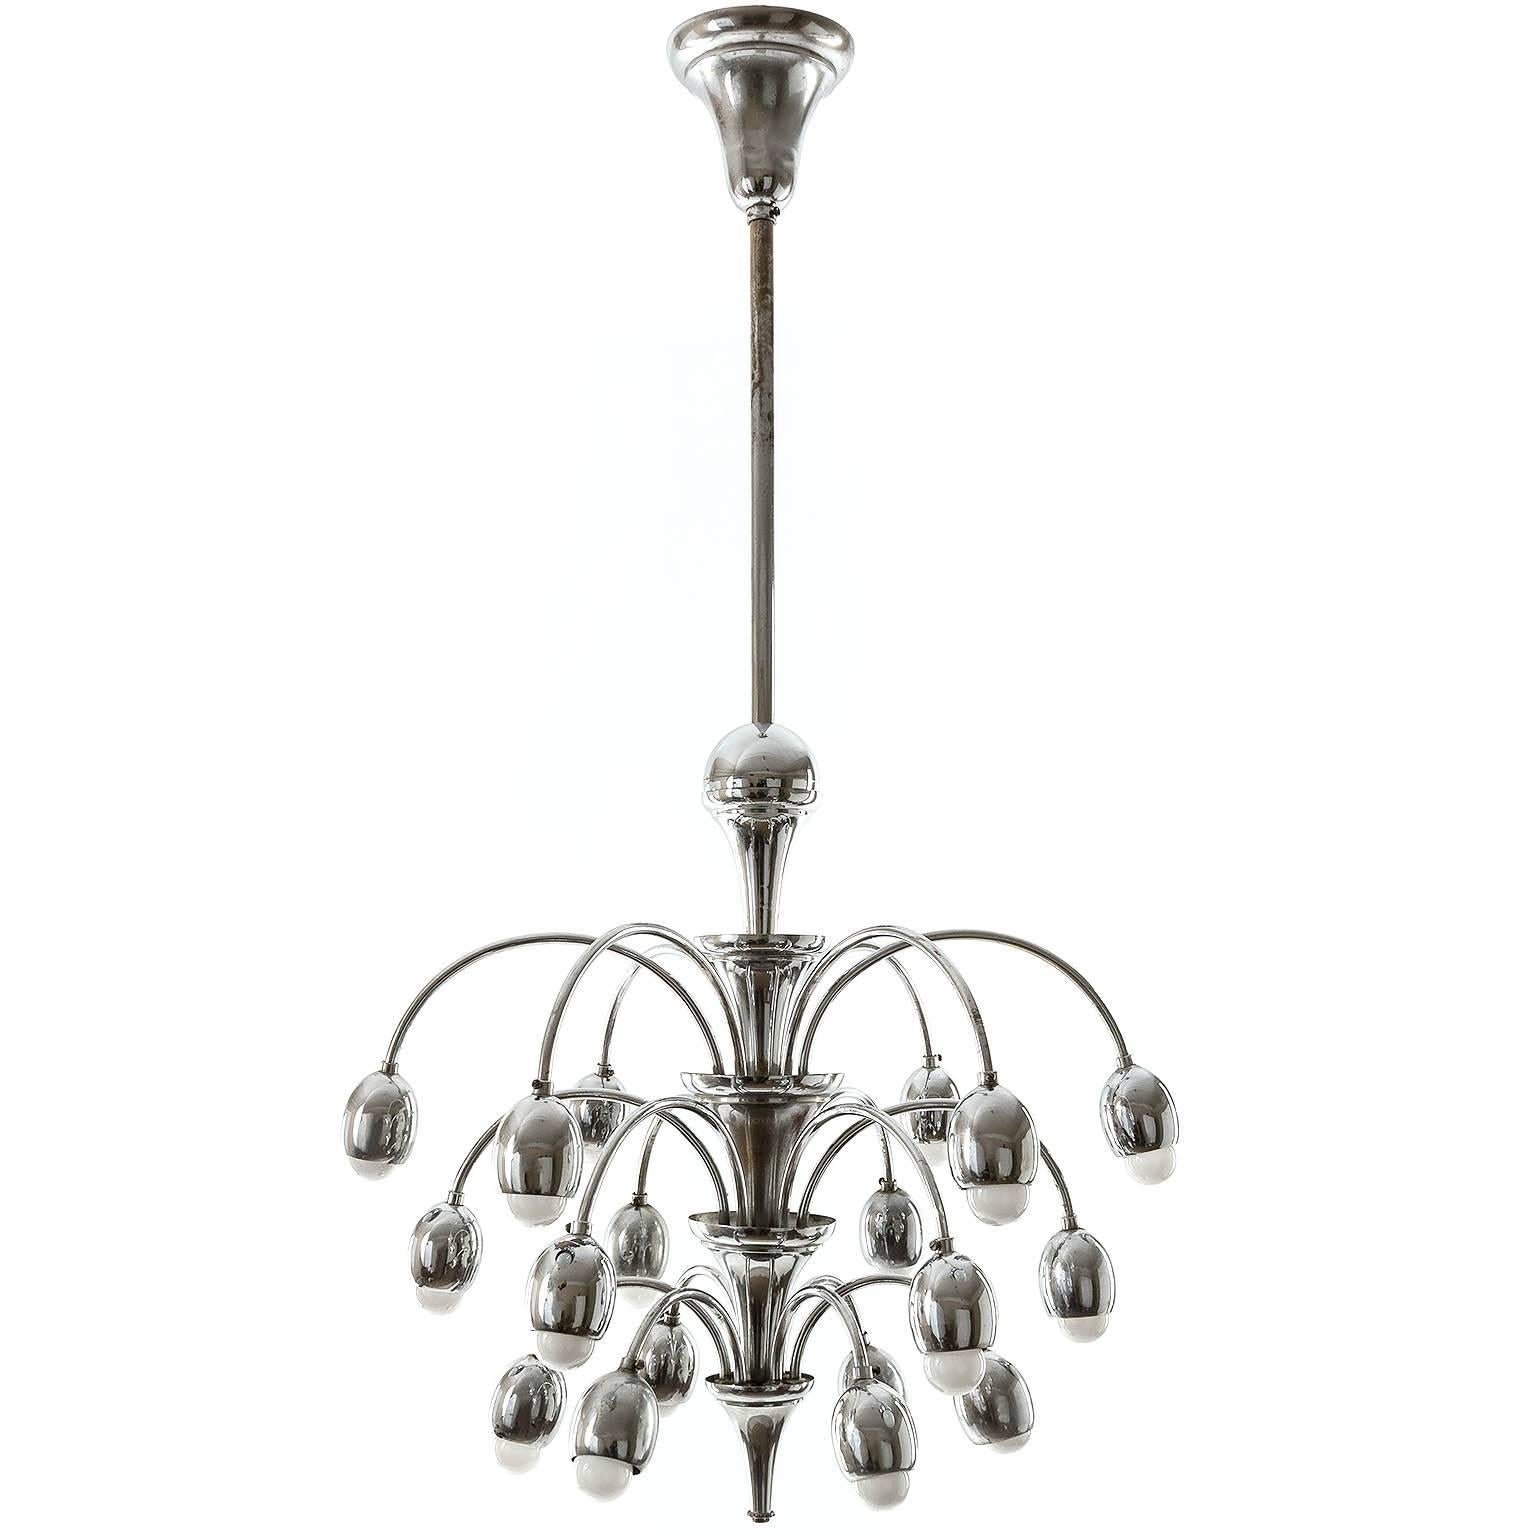 A large and gorgeous Art Deco chandelier, Austria, circa 1930. 
A nickel-plated brass frame with 18 arms and sockets for medium screw base bulbs (LED or filament can be used).
Little wear and lovely patina on nickel. 

Diameter: 27.6 in.